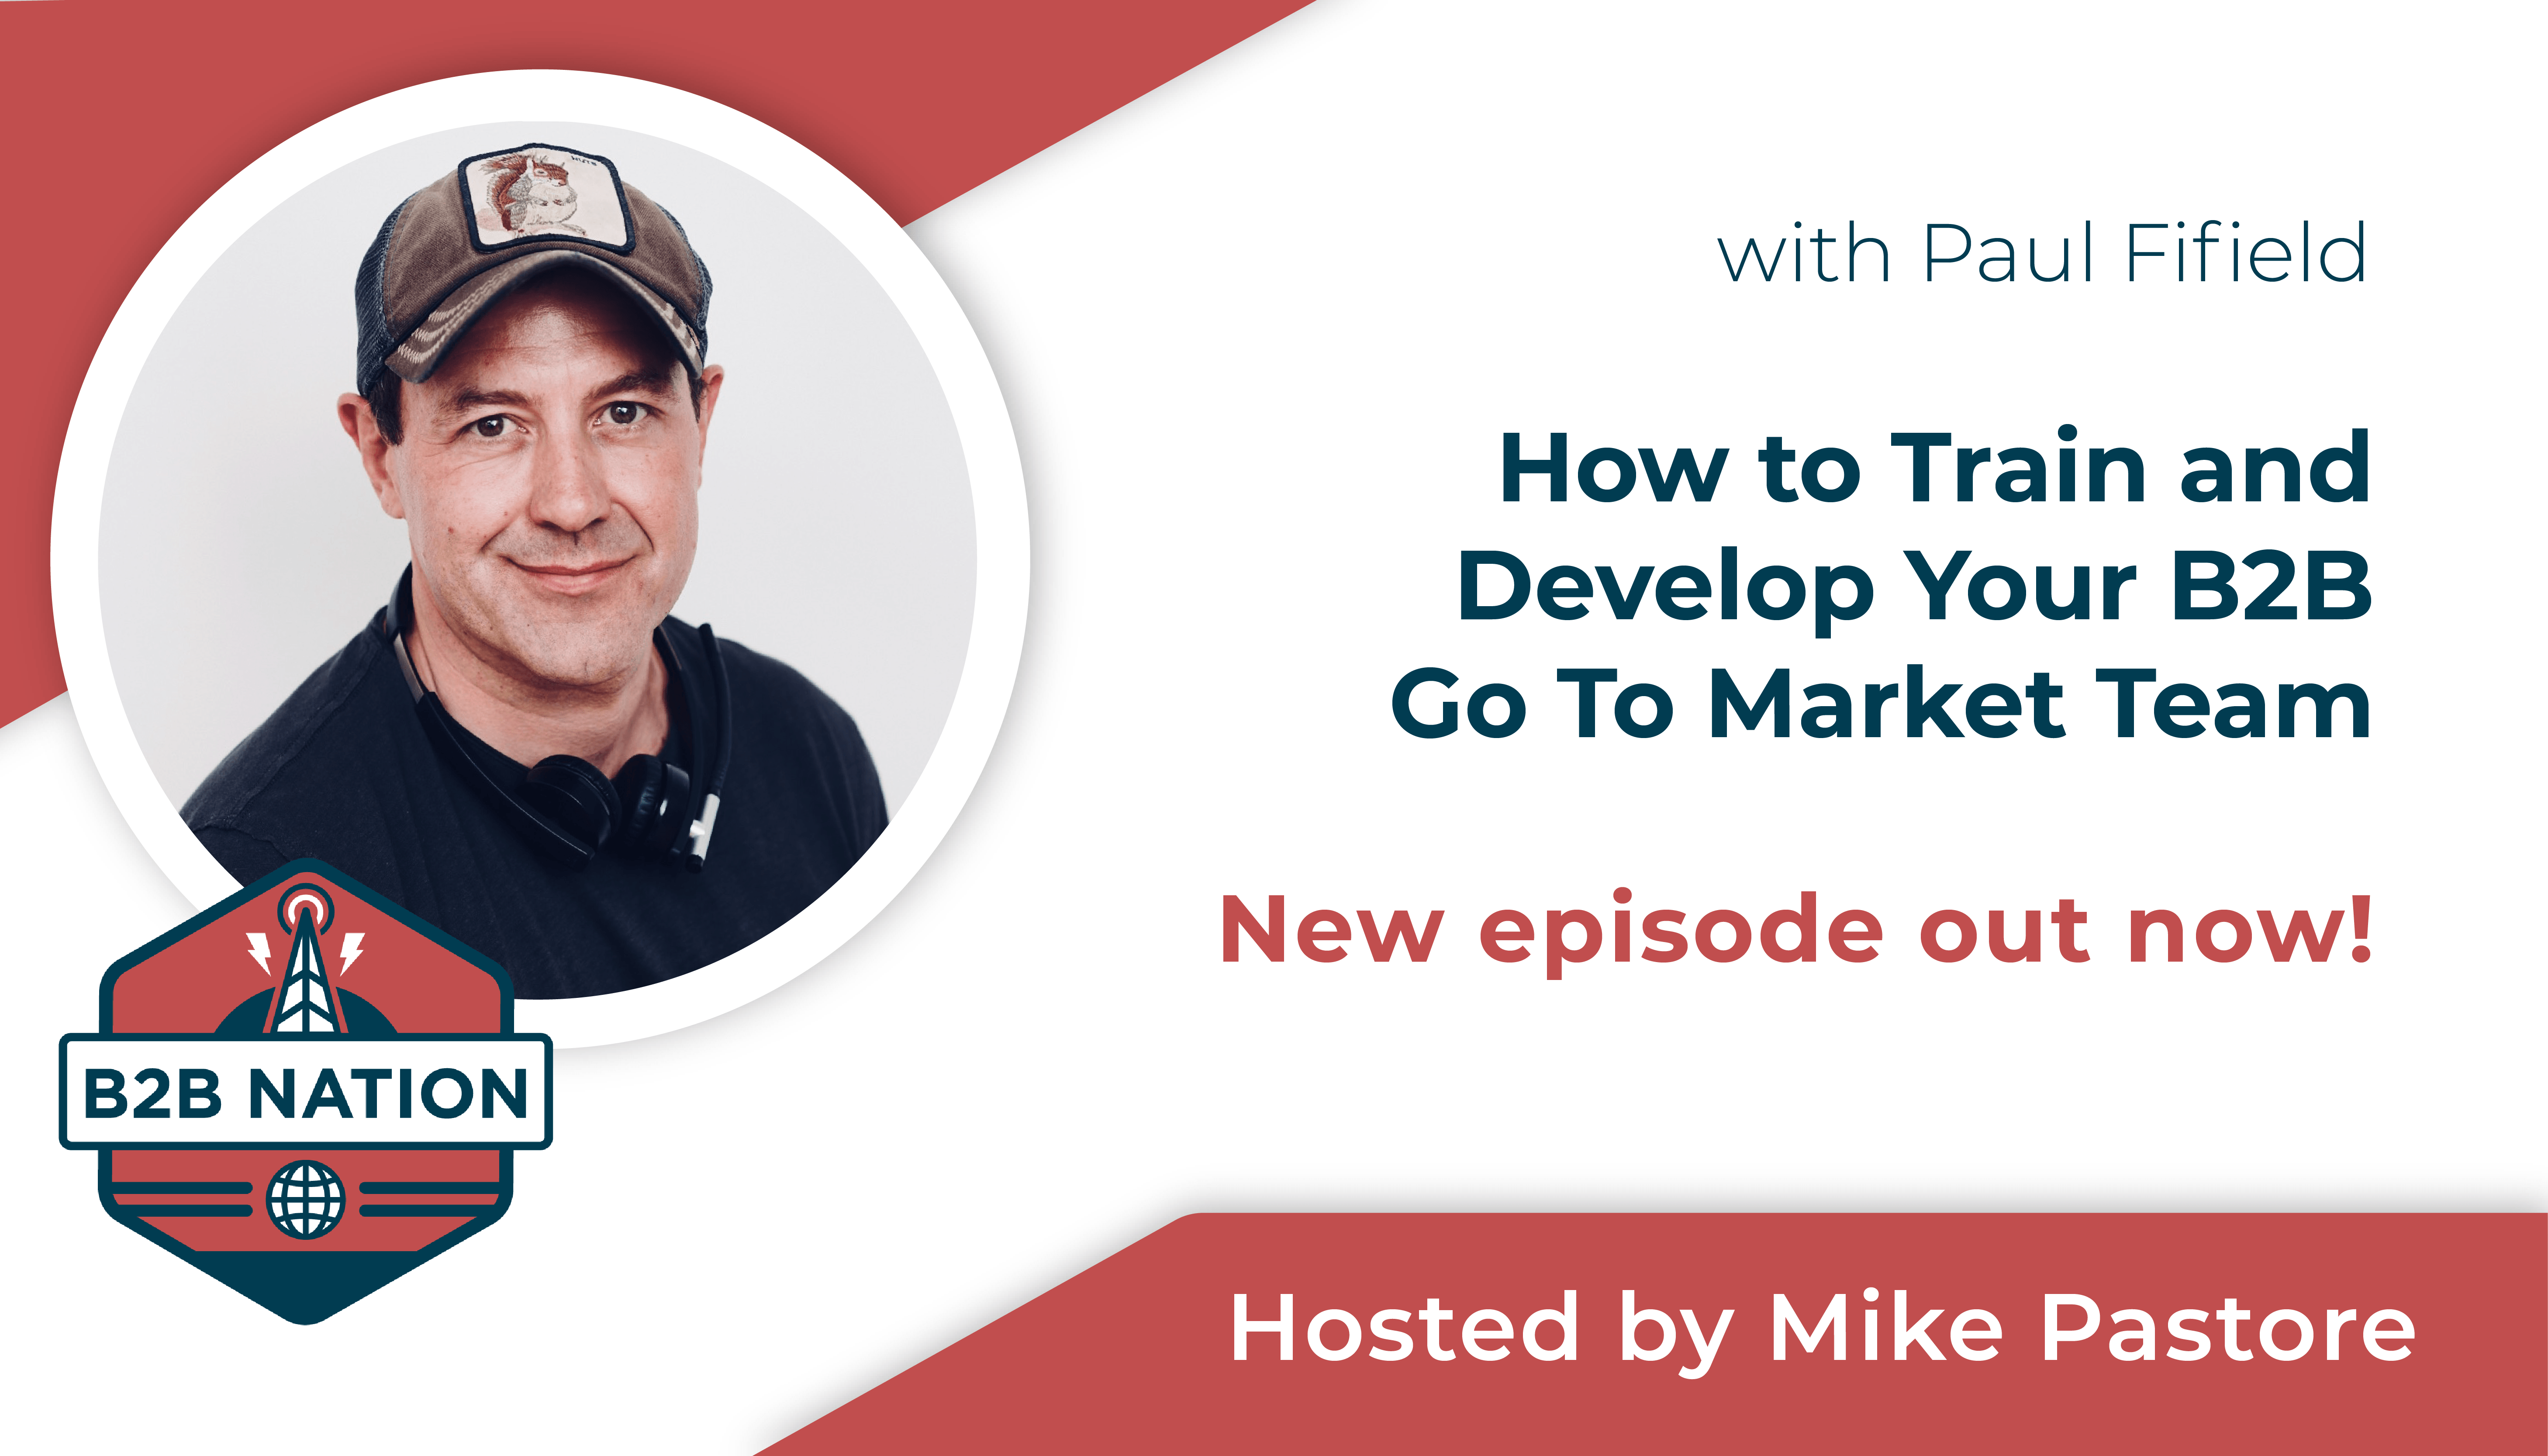 How to Train and Develop Your B2B Go To Market Team